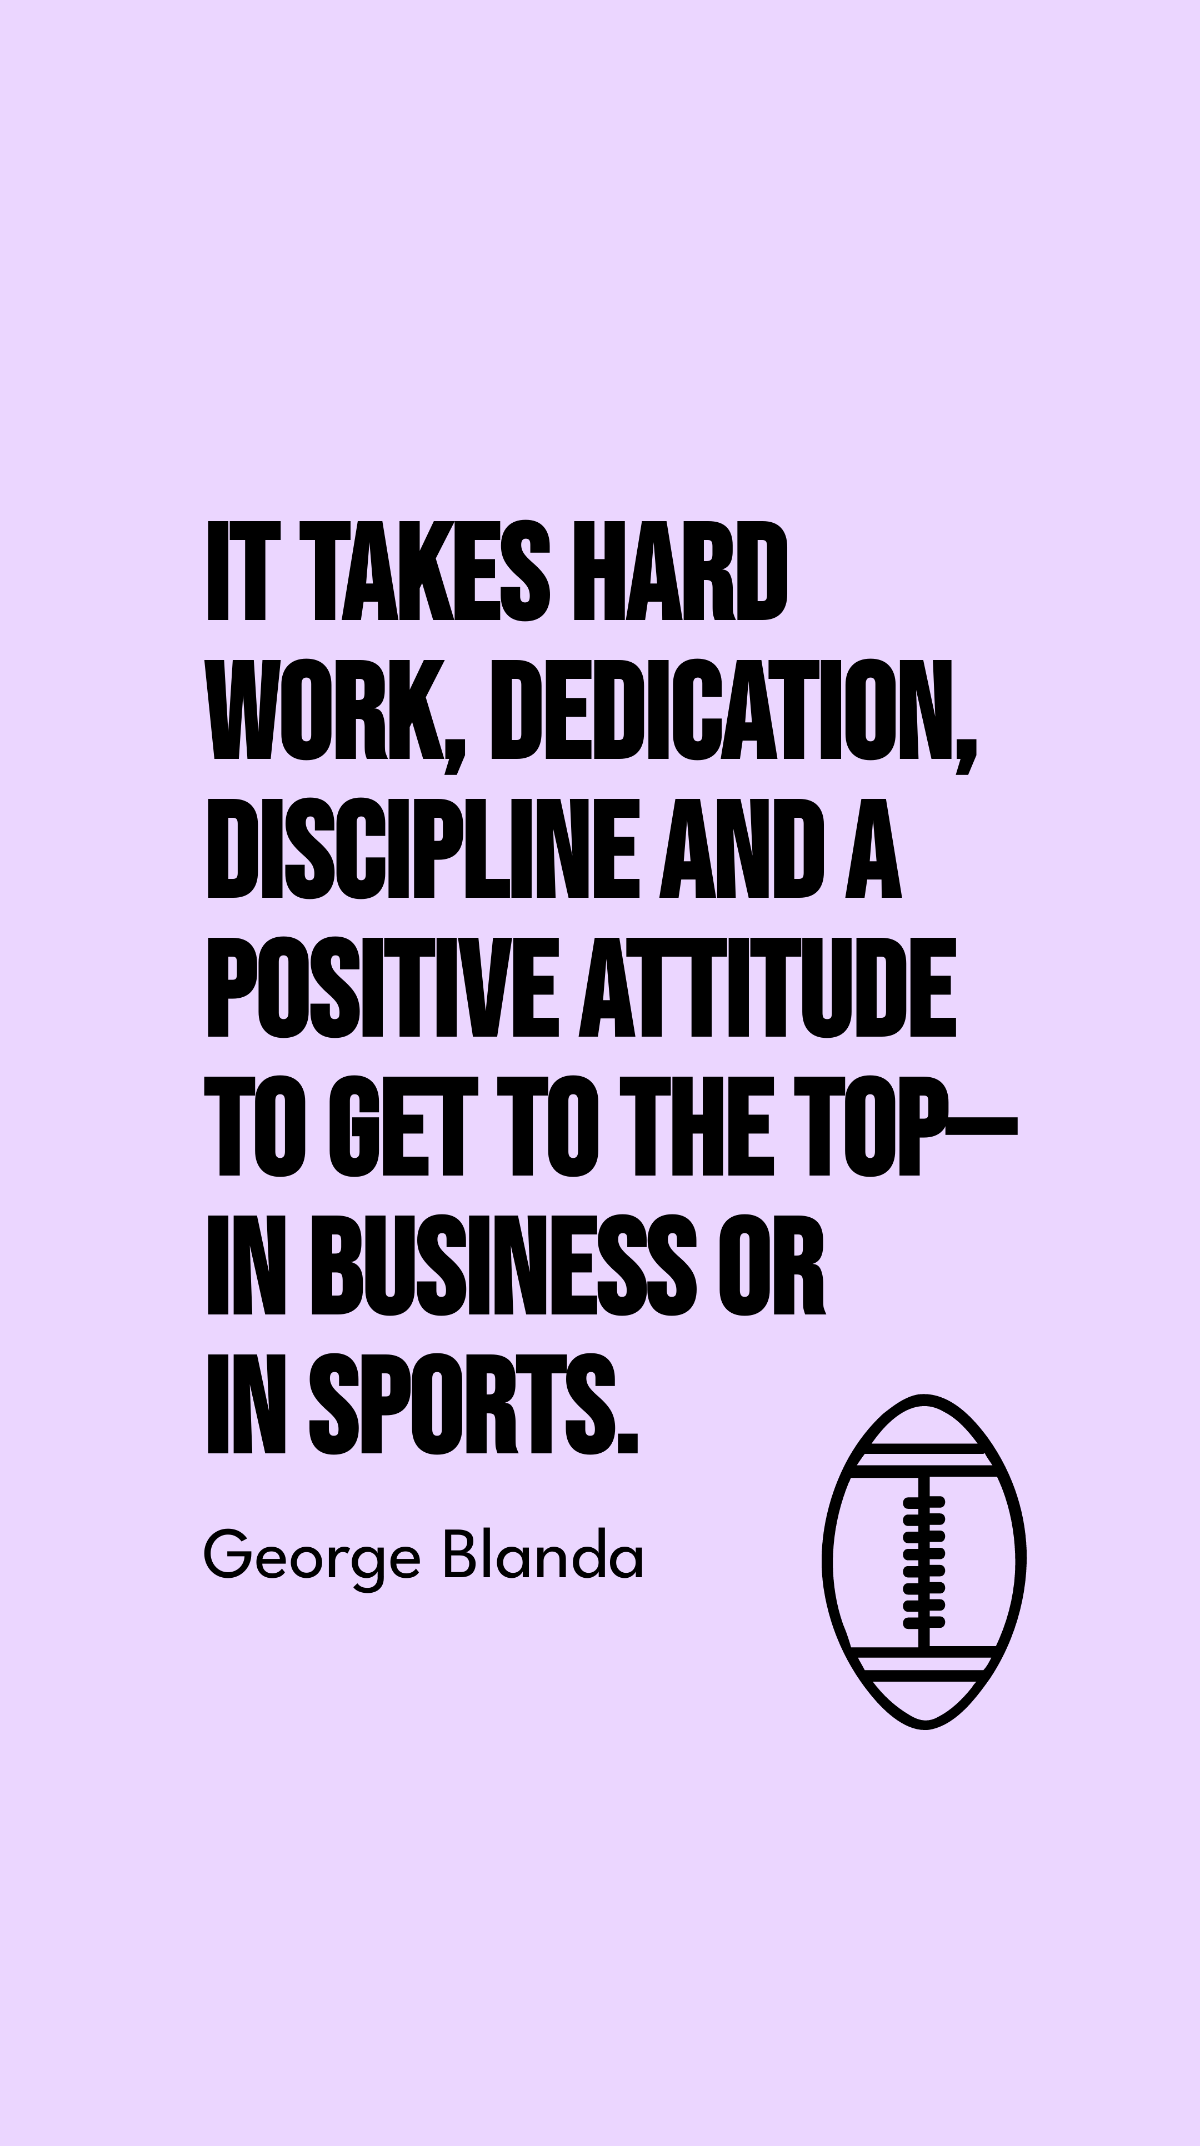 George Blanda - It takes hard work, dedication, discipline and a positive attitude to get to the top - in business or in sports. Template